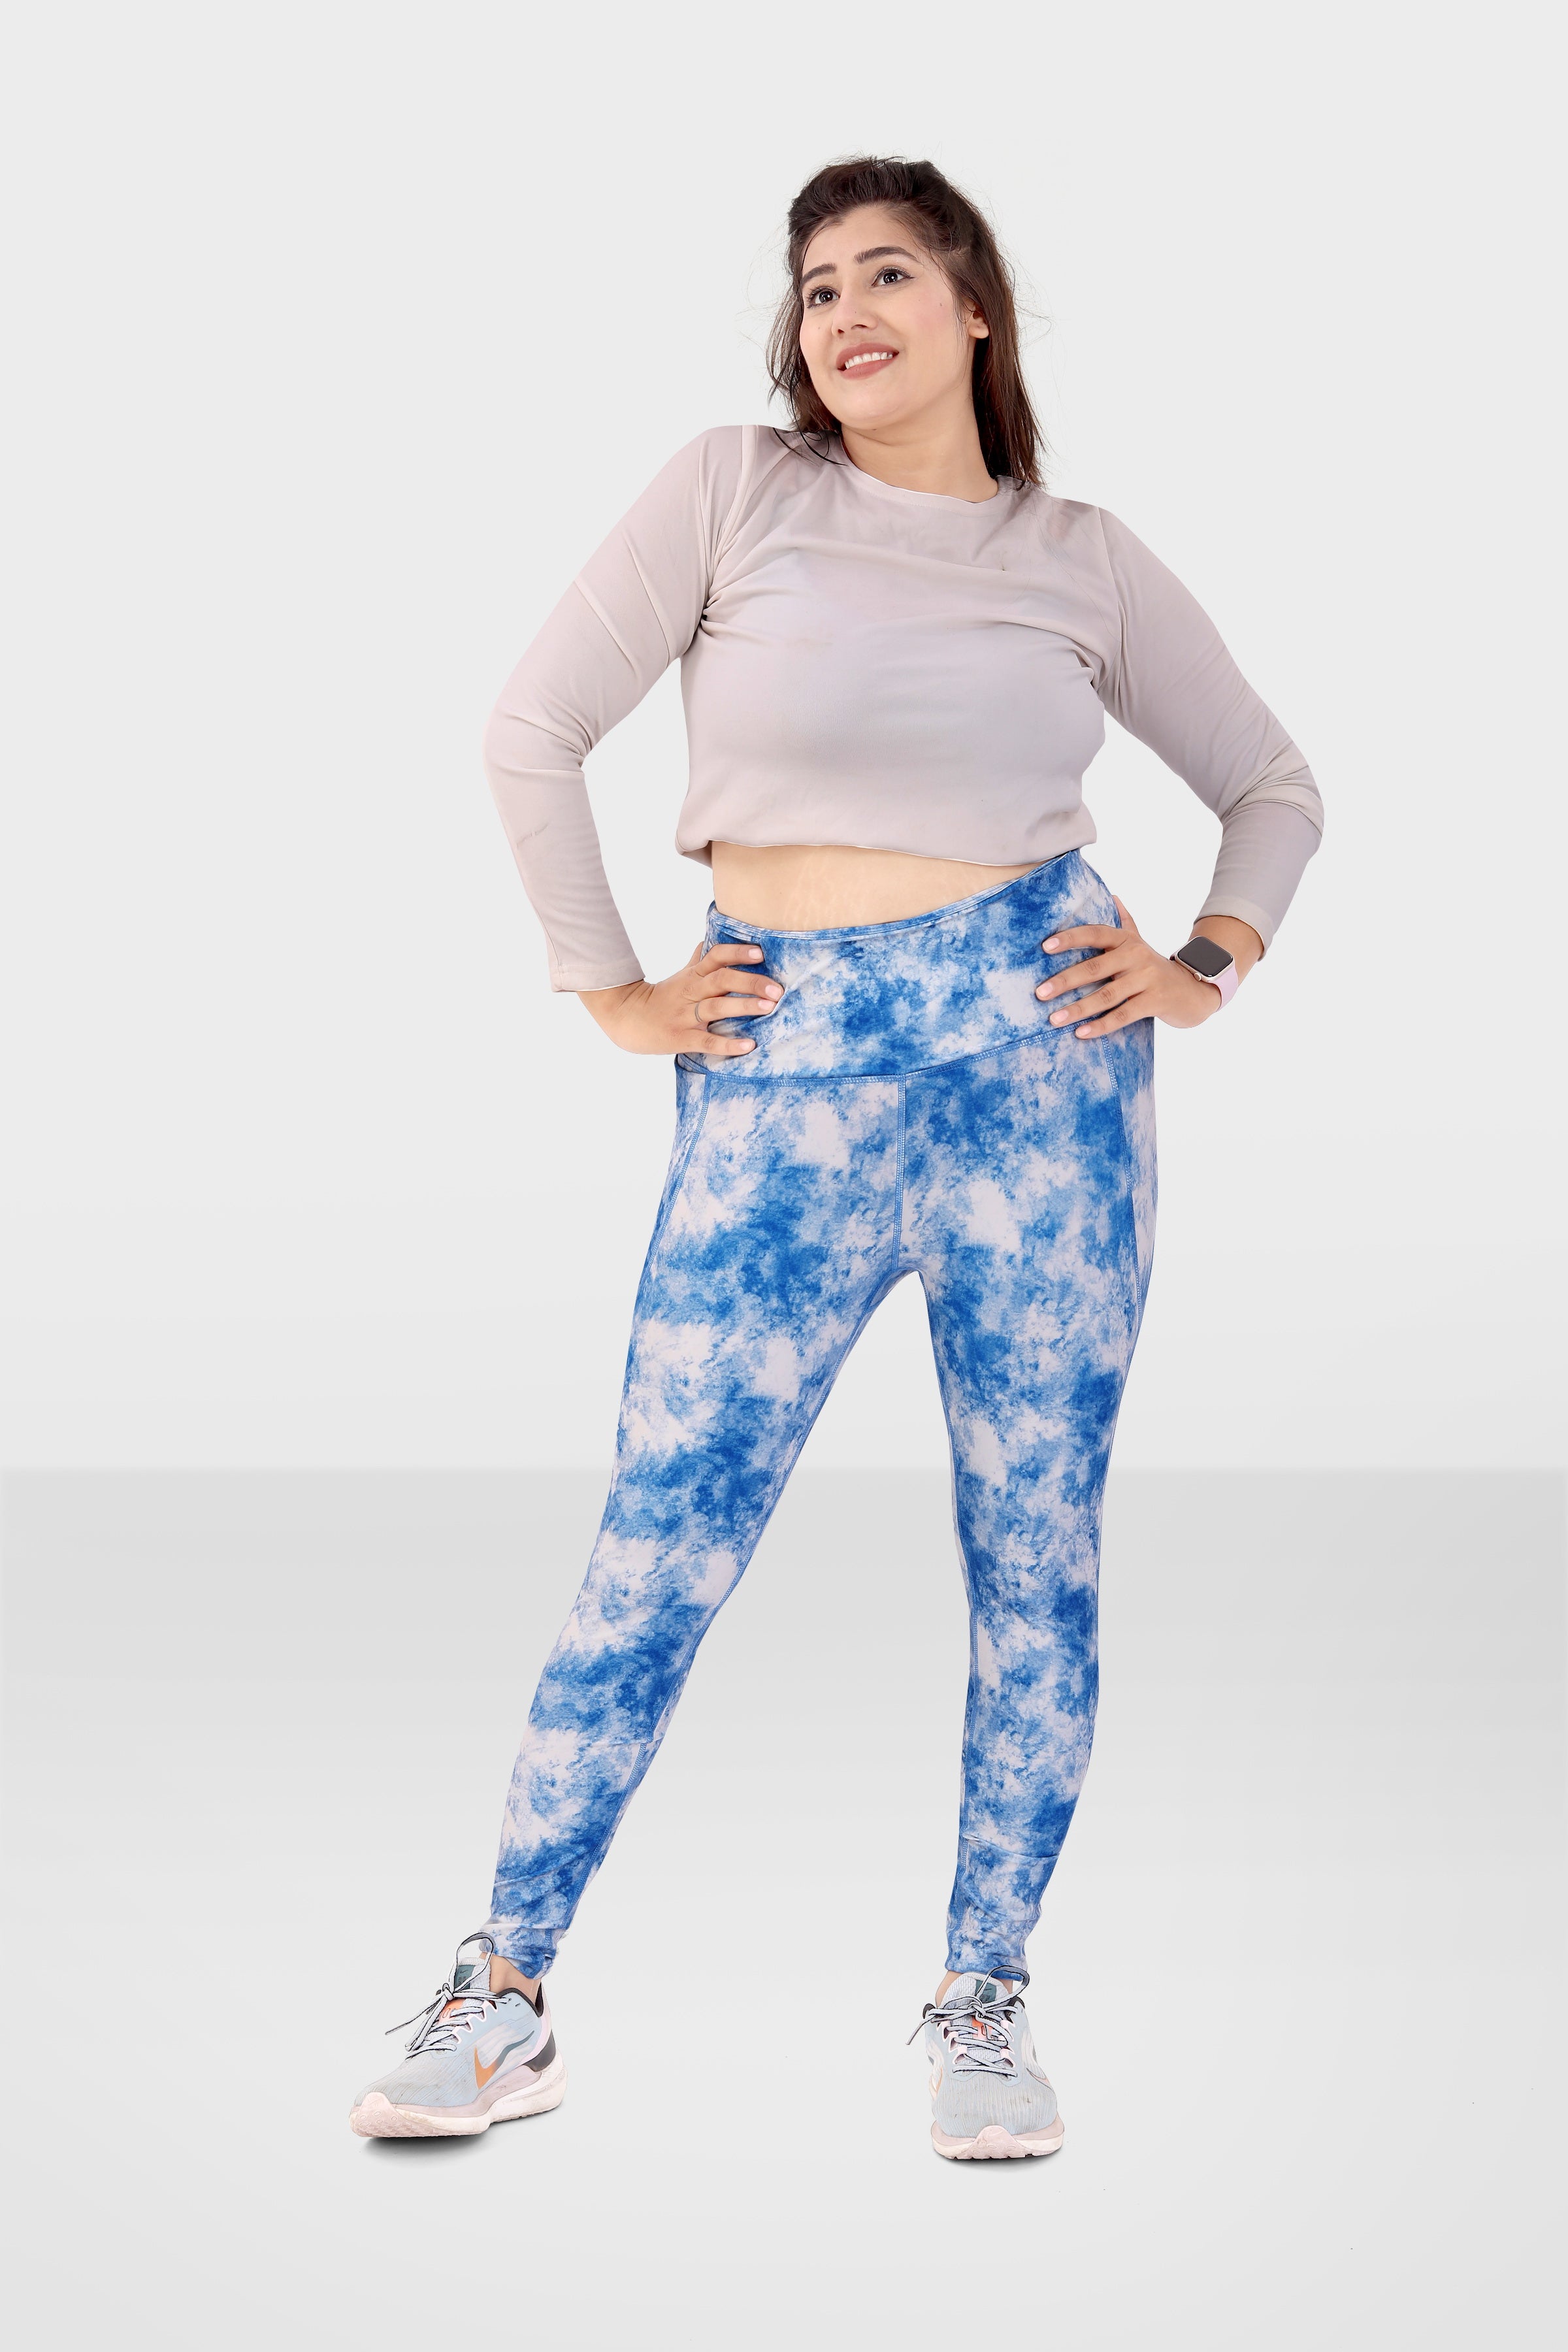 Buy Swastik Stuffs Women's Cotton Lycra Leggings Combo Offer for Women  (SSLPSBlu3_Pink,Skin,Blue_Free Size)(Pack of 3) Online at Low Prices in  India - Paytmmall.com